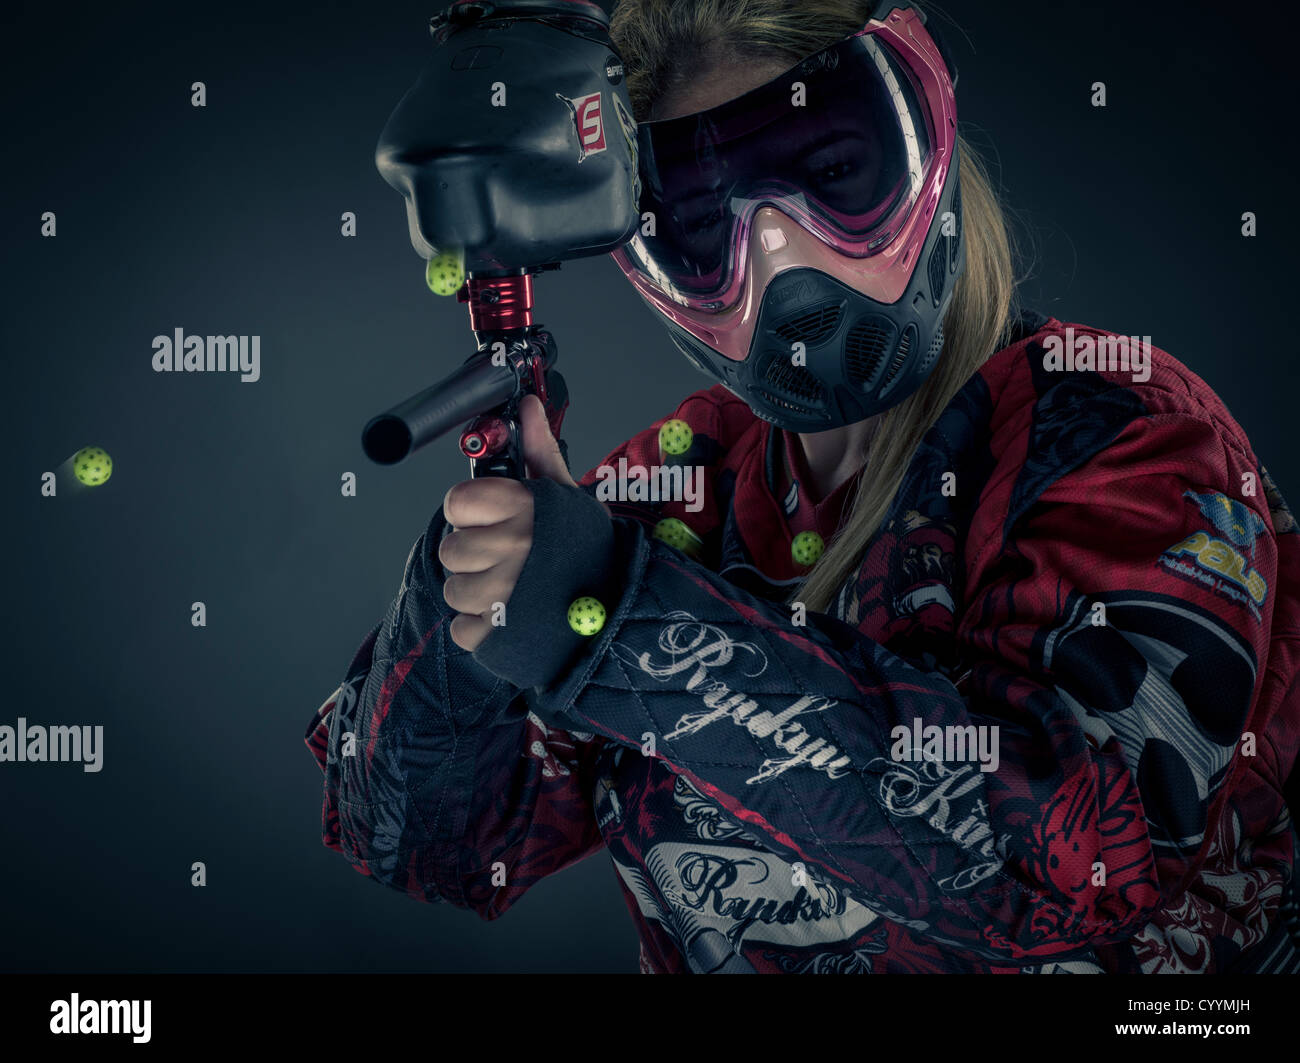 Woman Paintballer with paintball gun and body armor Stock Photo